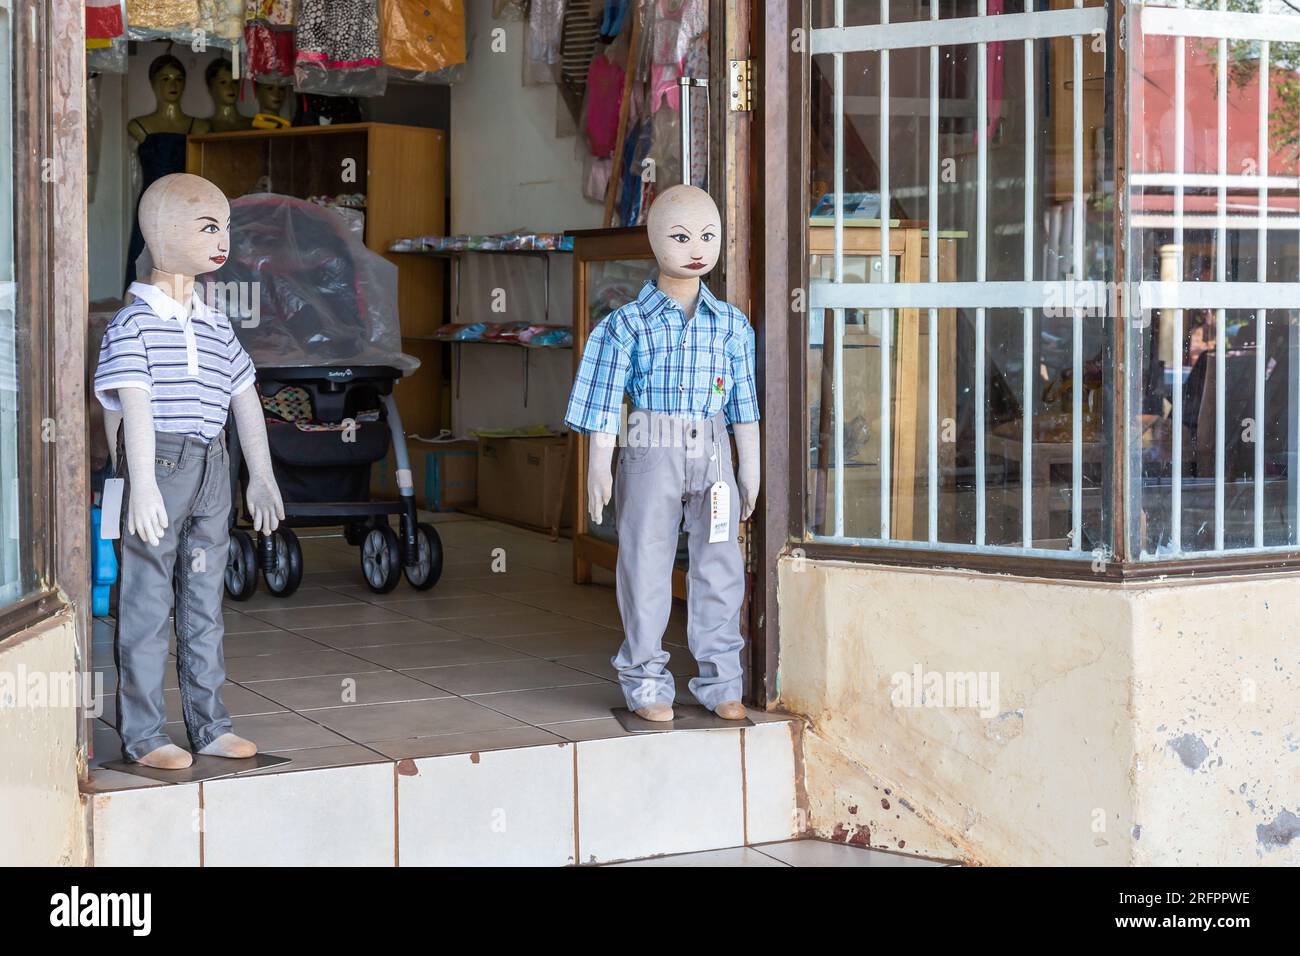 At the entrance to a store dedicated to children, two mannequins stand guard. Jinja, Uganda. Stock Photo